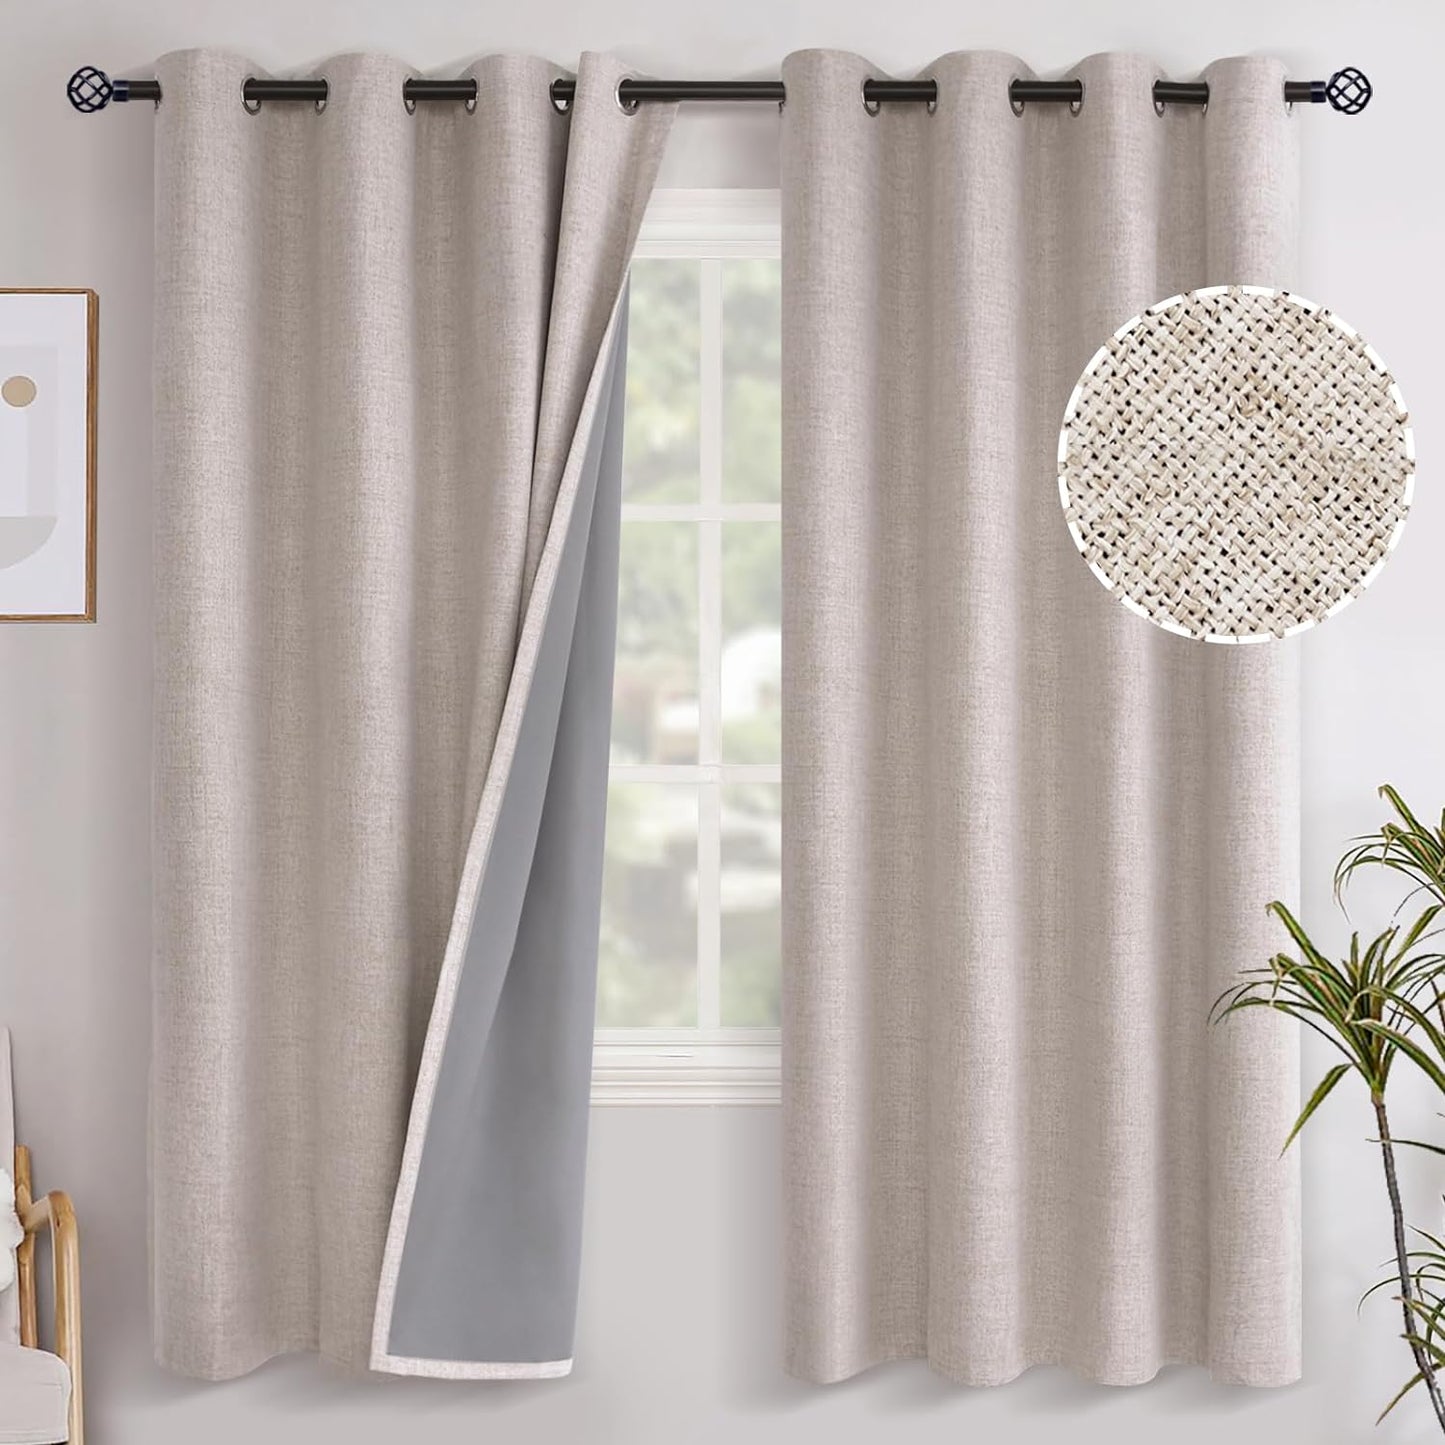 Youngstex Linen Blackout Curtains 63 Inch Length, Grommet Darkening Bedroom Curtains Burlap Linen Window Drapes Thermal Insulated for Basement Summer Heat, 2 Panels, 52 X 63 Inch, Beige  YoungsTex Beige 52W X 72L 